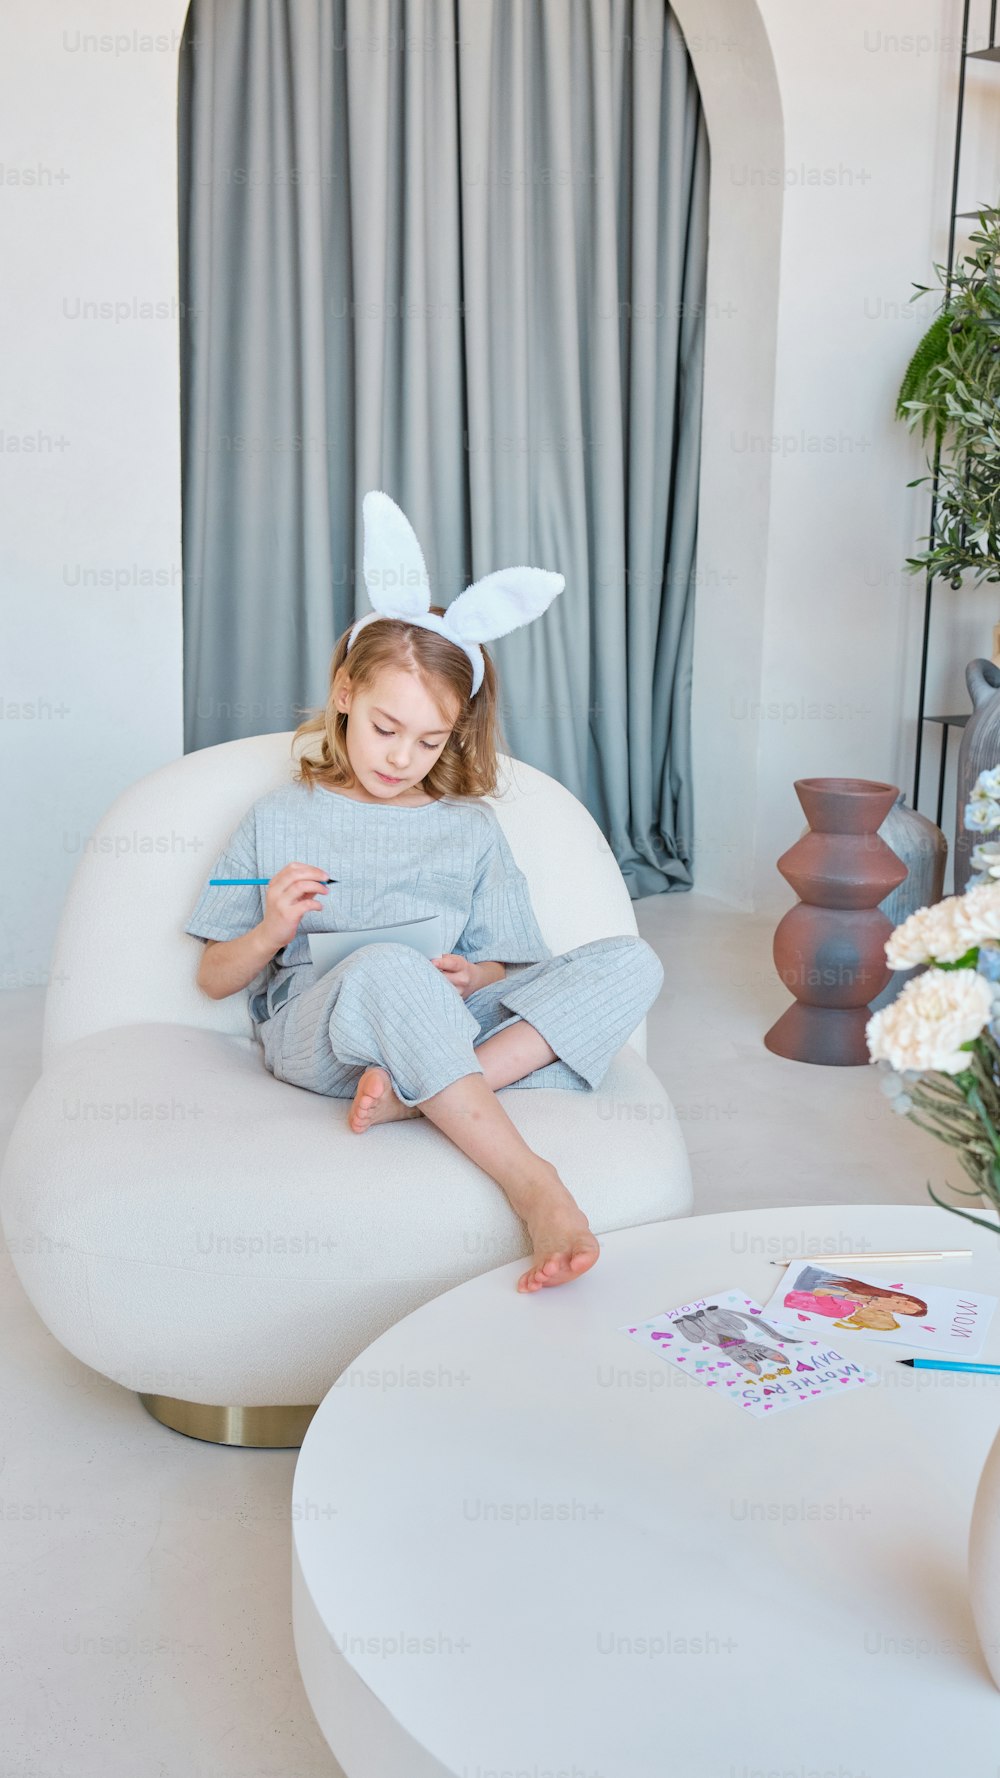 a little girl sitting in a chair with a bunny ears on her head